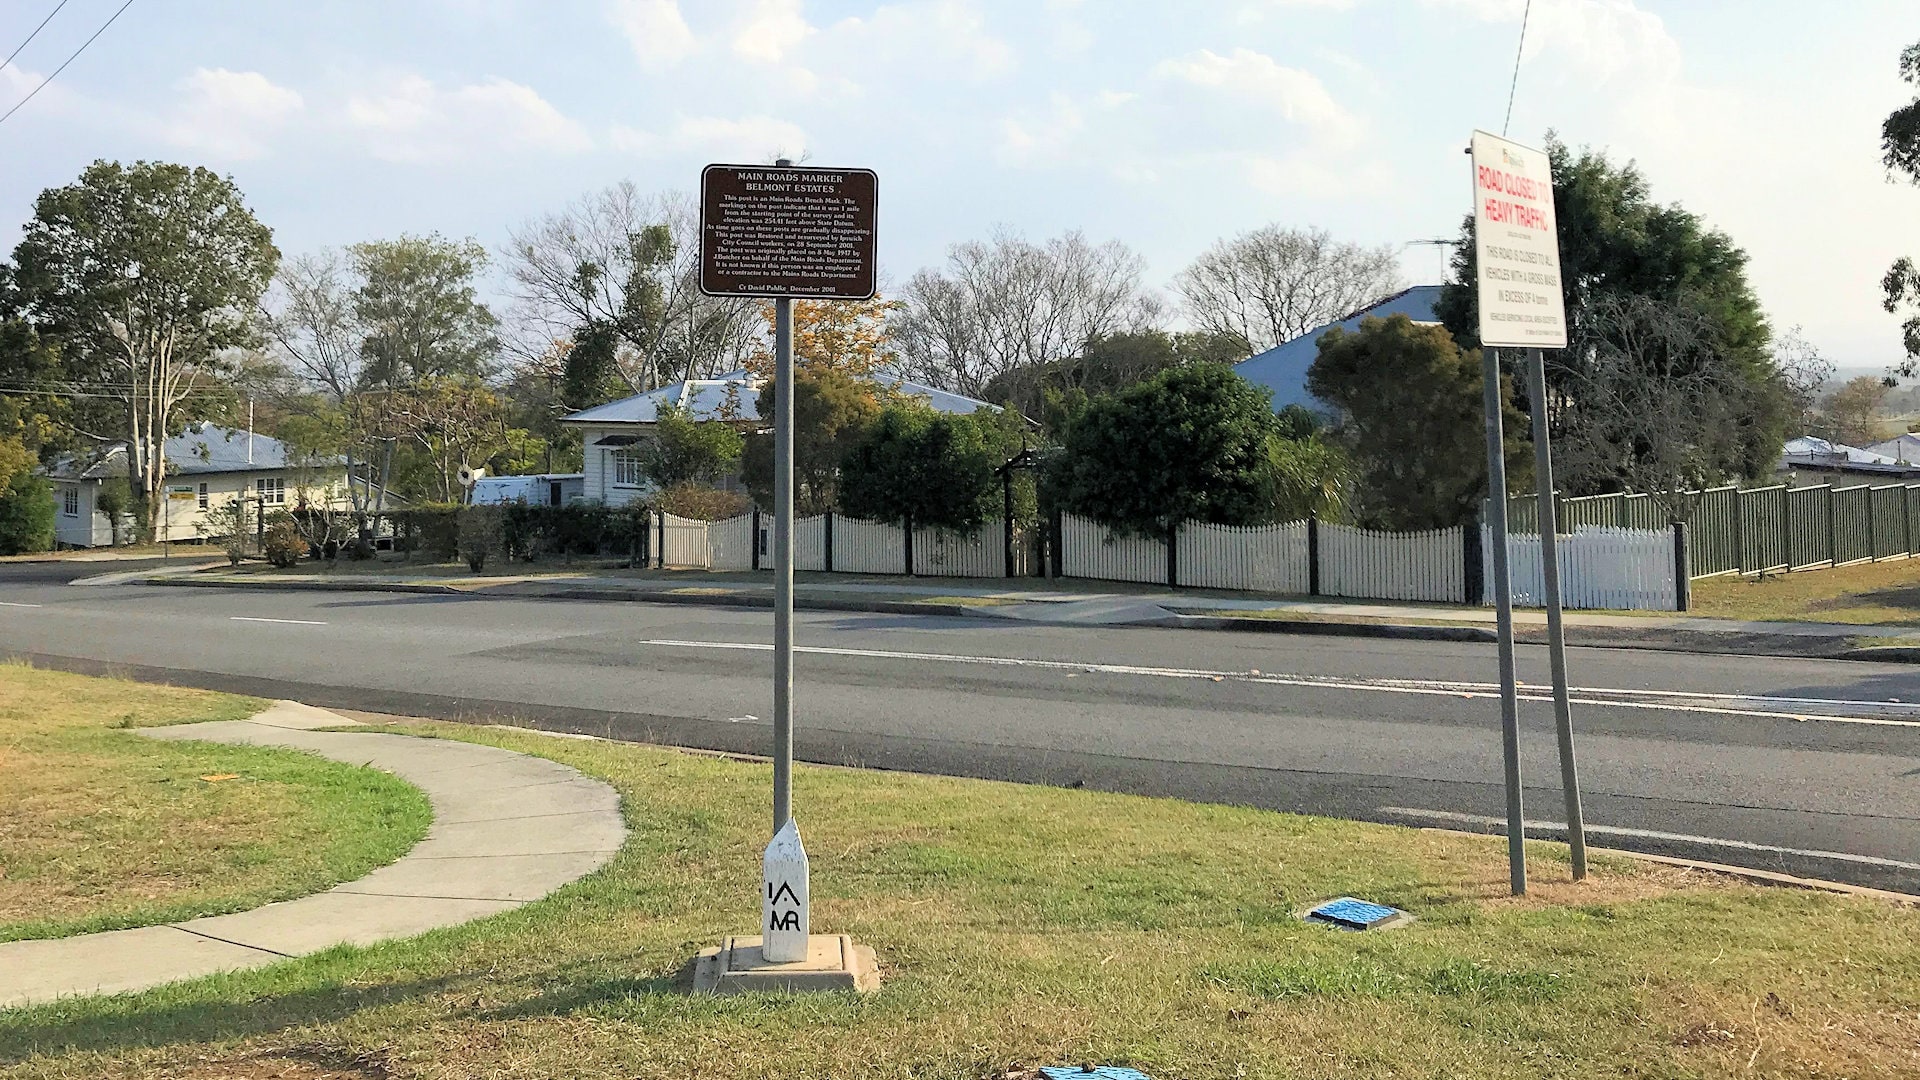 Mile marker on the corner of a road with a brown sign above it